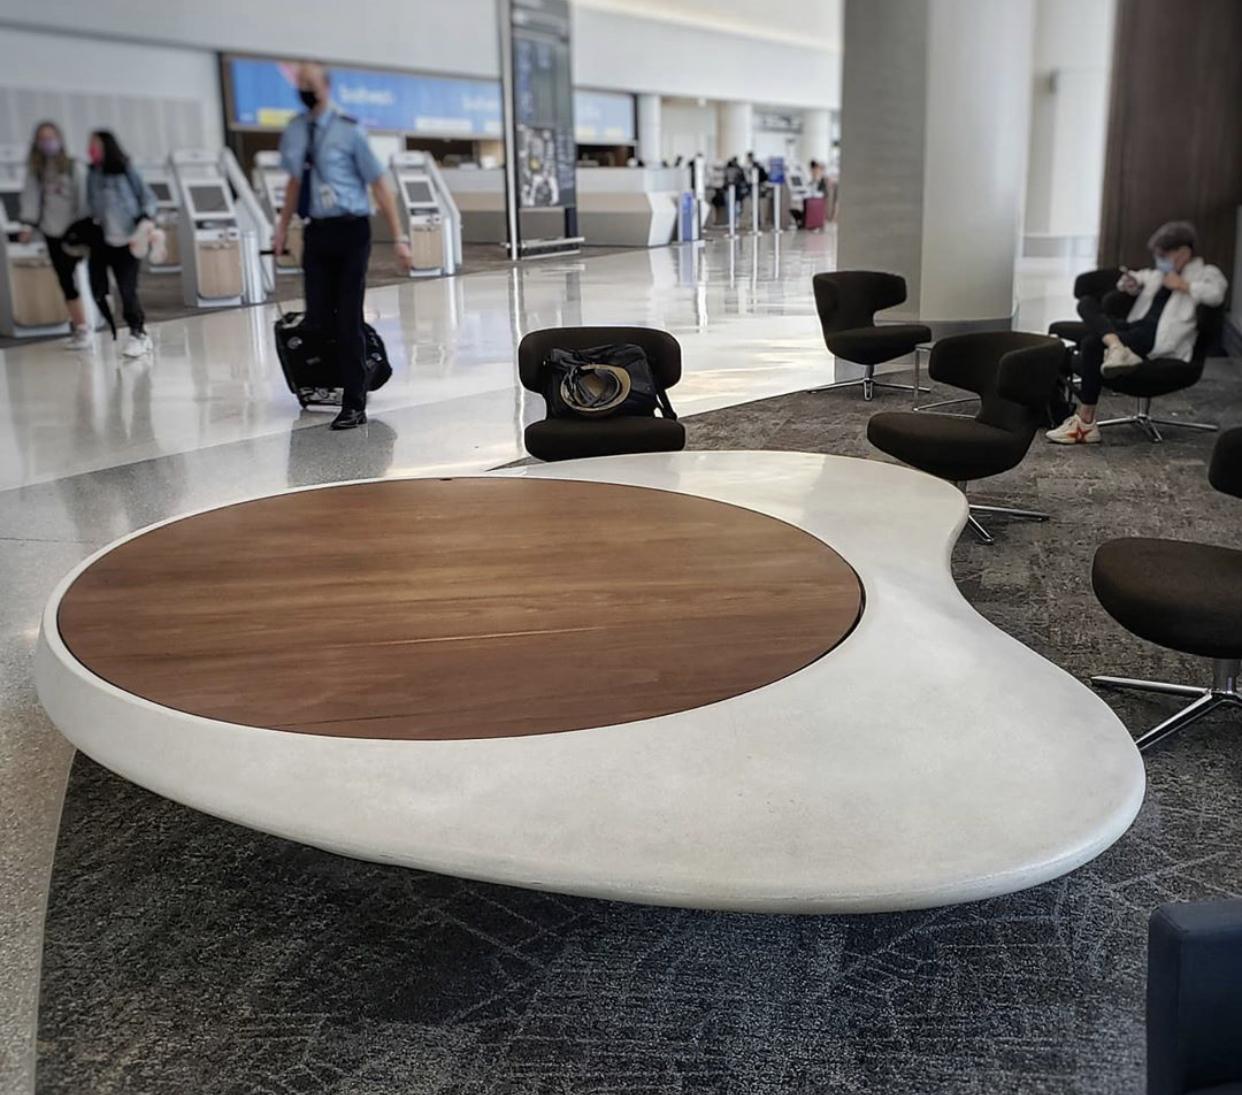 Seating area in black with and wood at the airport. 